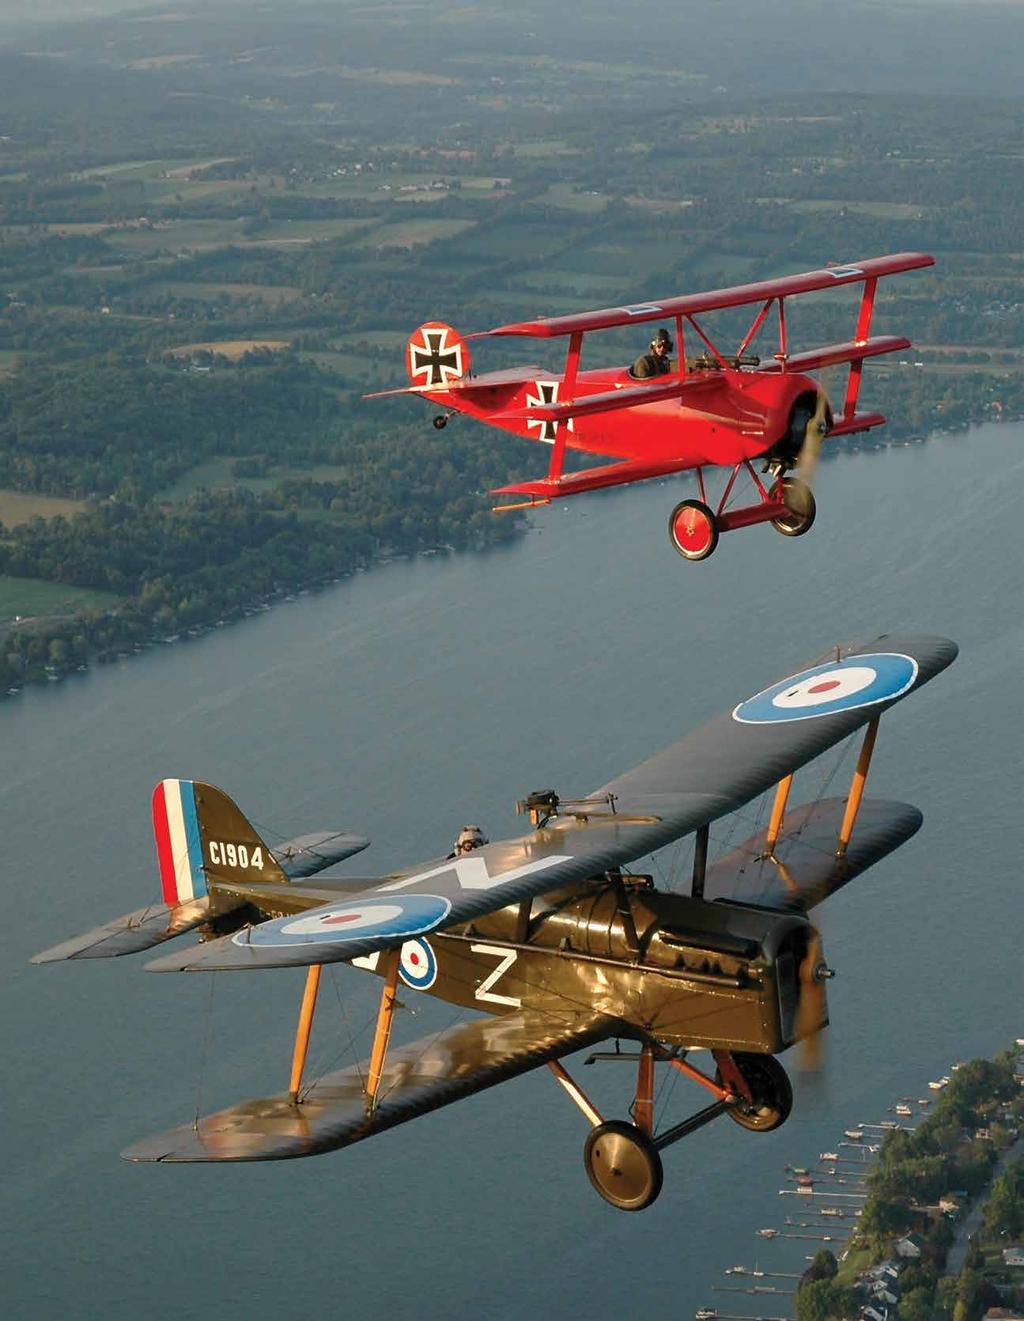 THE AERIAL BALLET of the Great War Flying Museum has entertained Canadian and American airshow goers